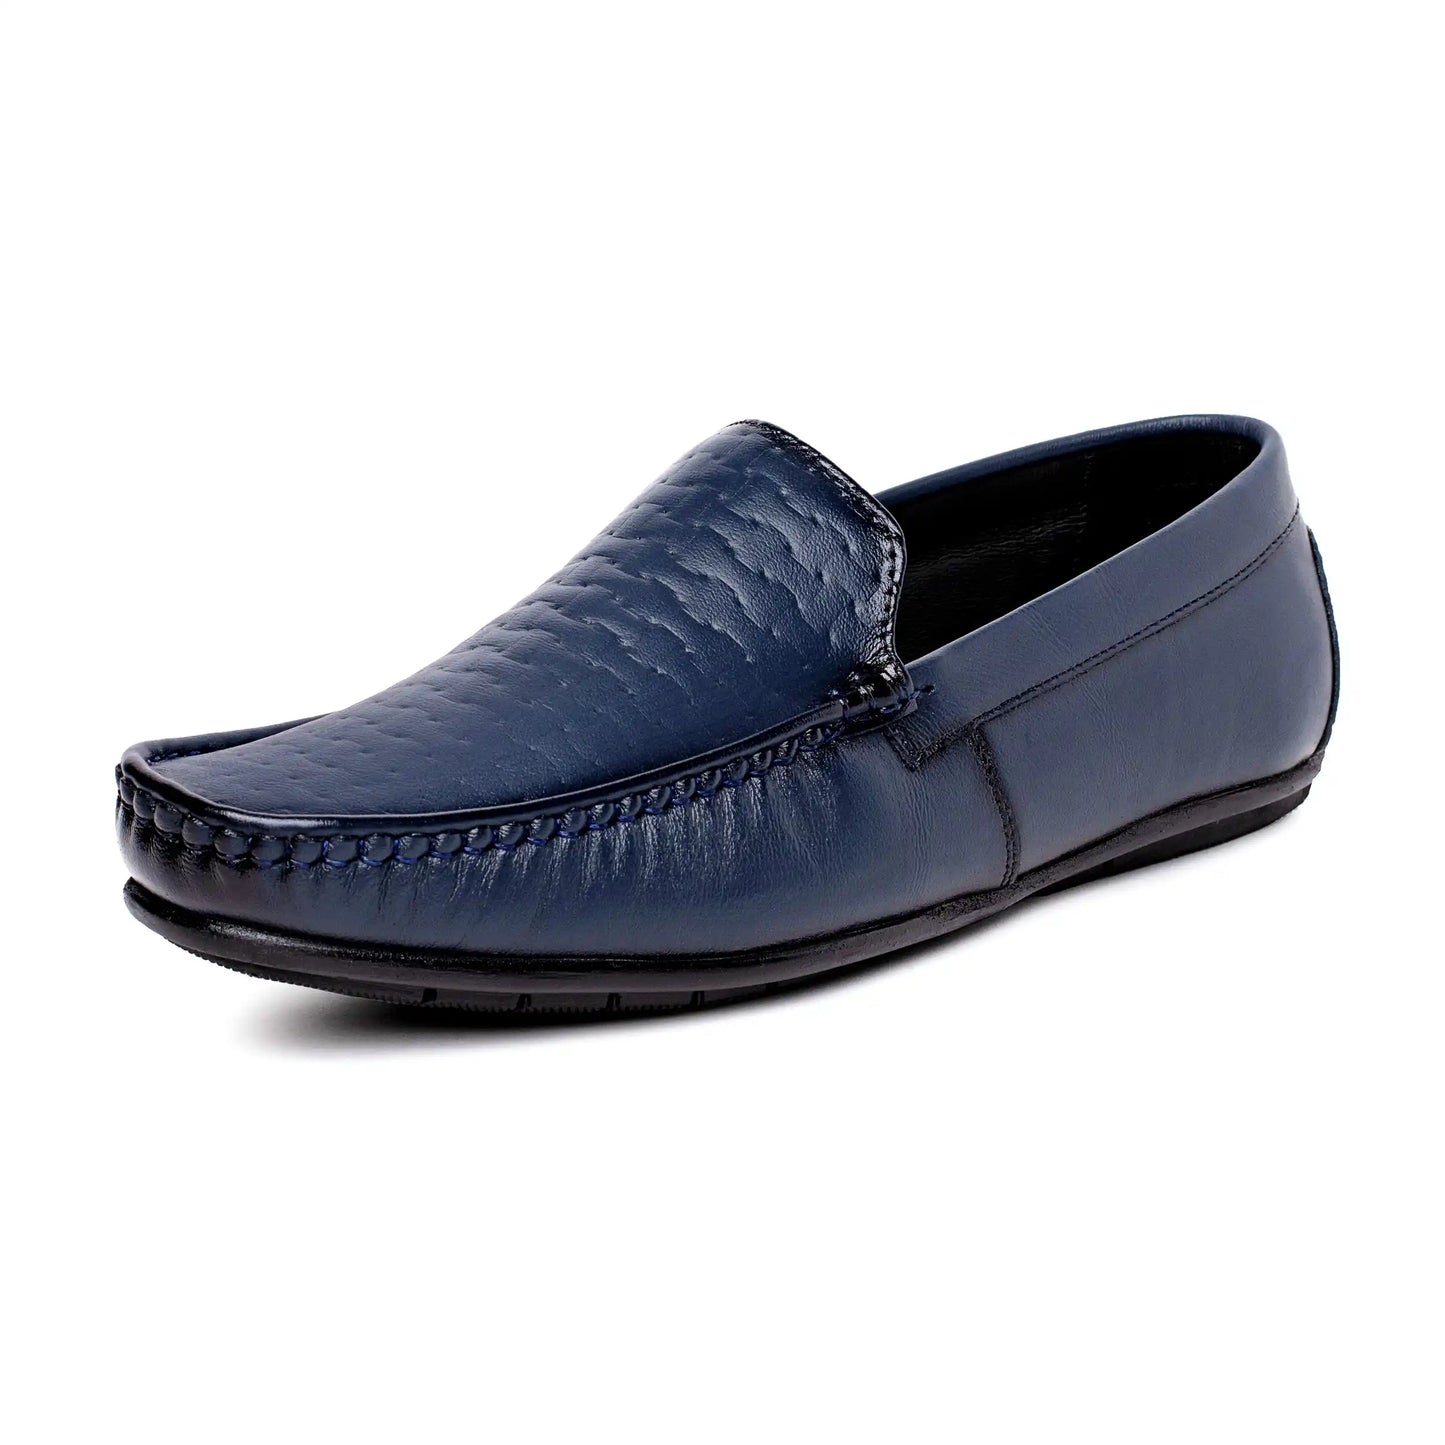 Men Pure Leather Casual Slip On Loafers